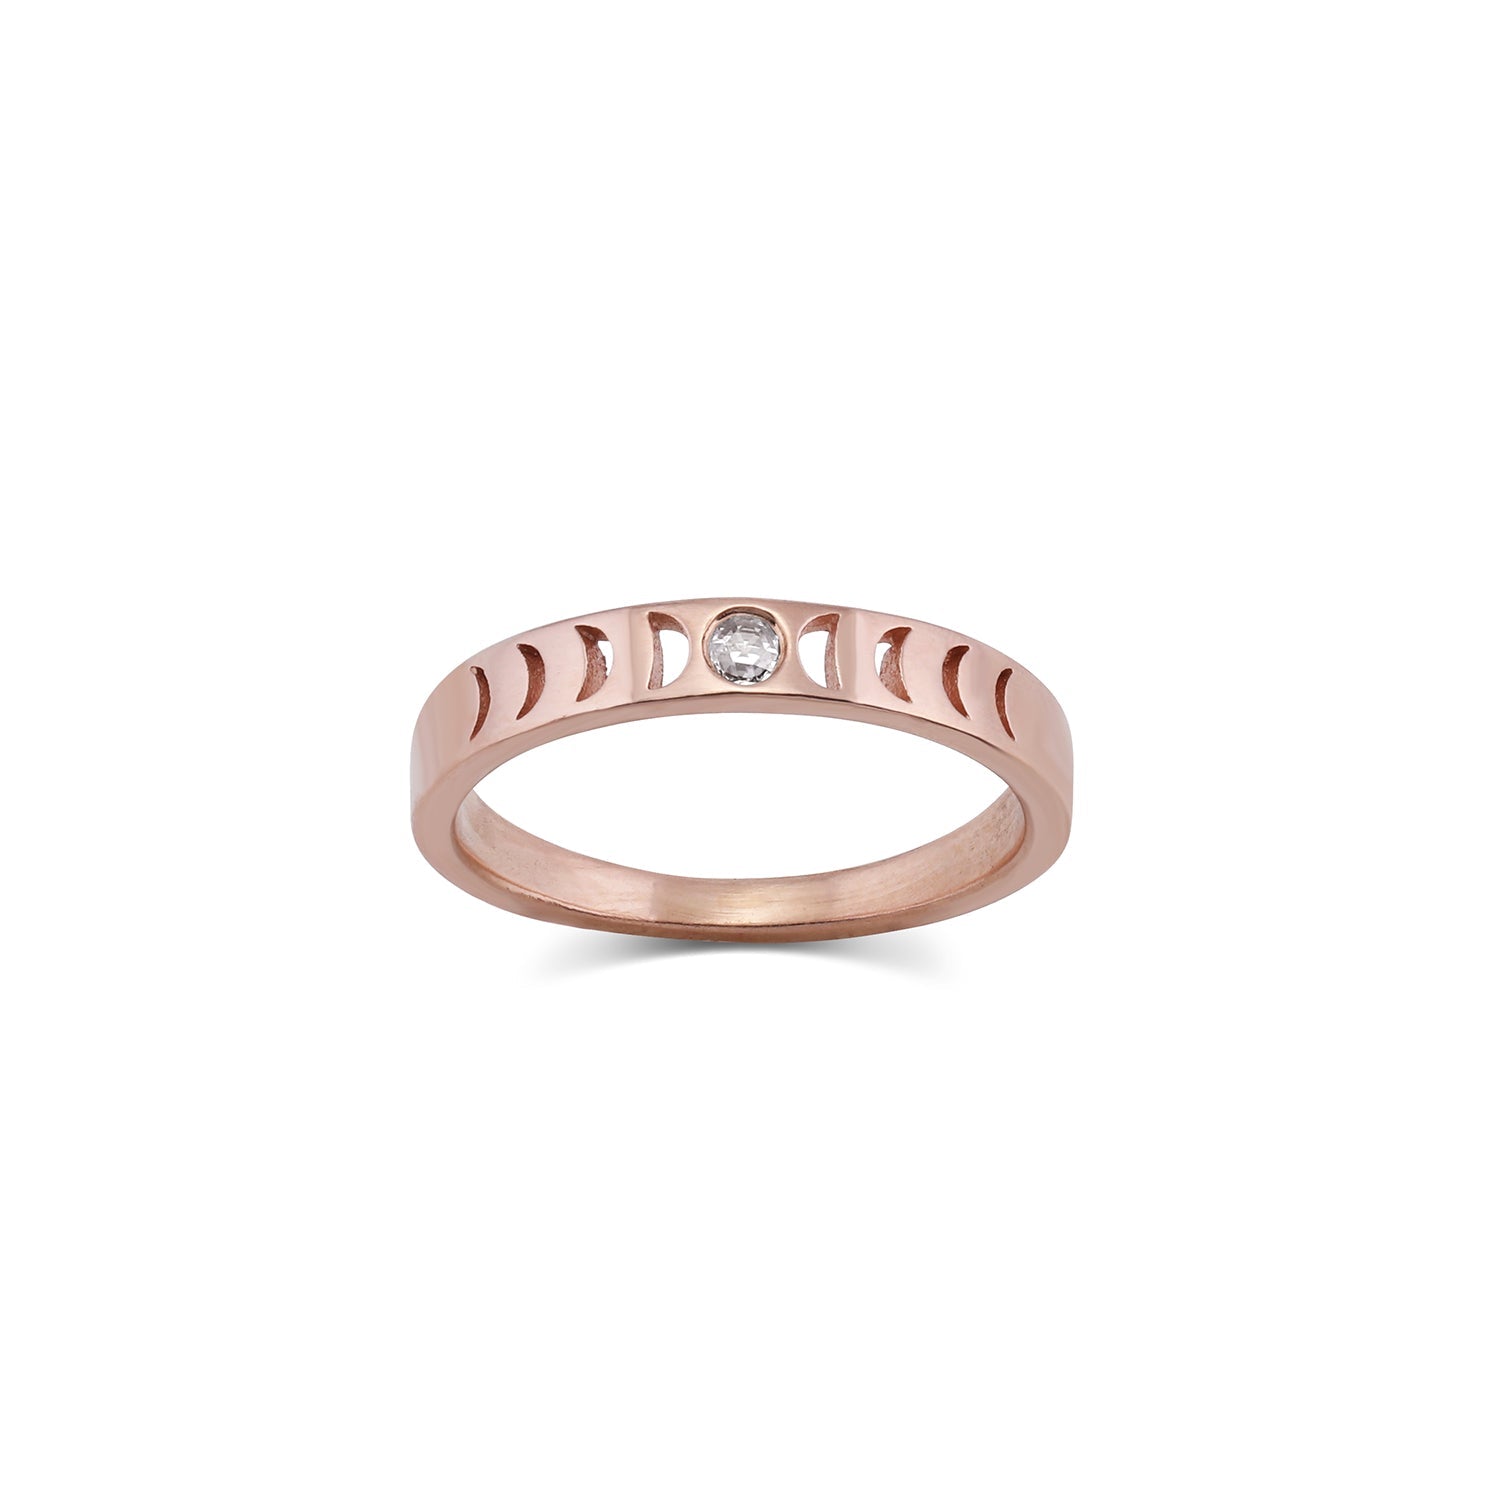 Moon Phase Rings moon phase rings > stacking rings > wedding bands > gender neutral bands > rose cut diamond ring > promise rings >lunar phase ring > moon ring > phases of the moon ring 14k rose gold / 4 Original Moon phase ring || Rose Gold